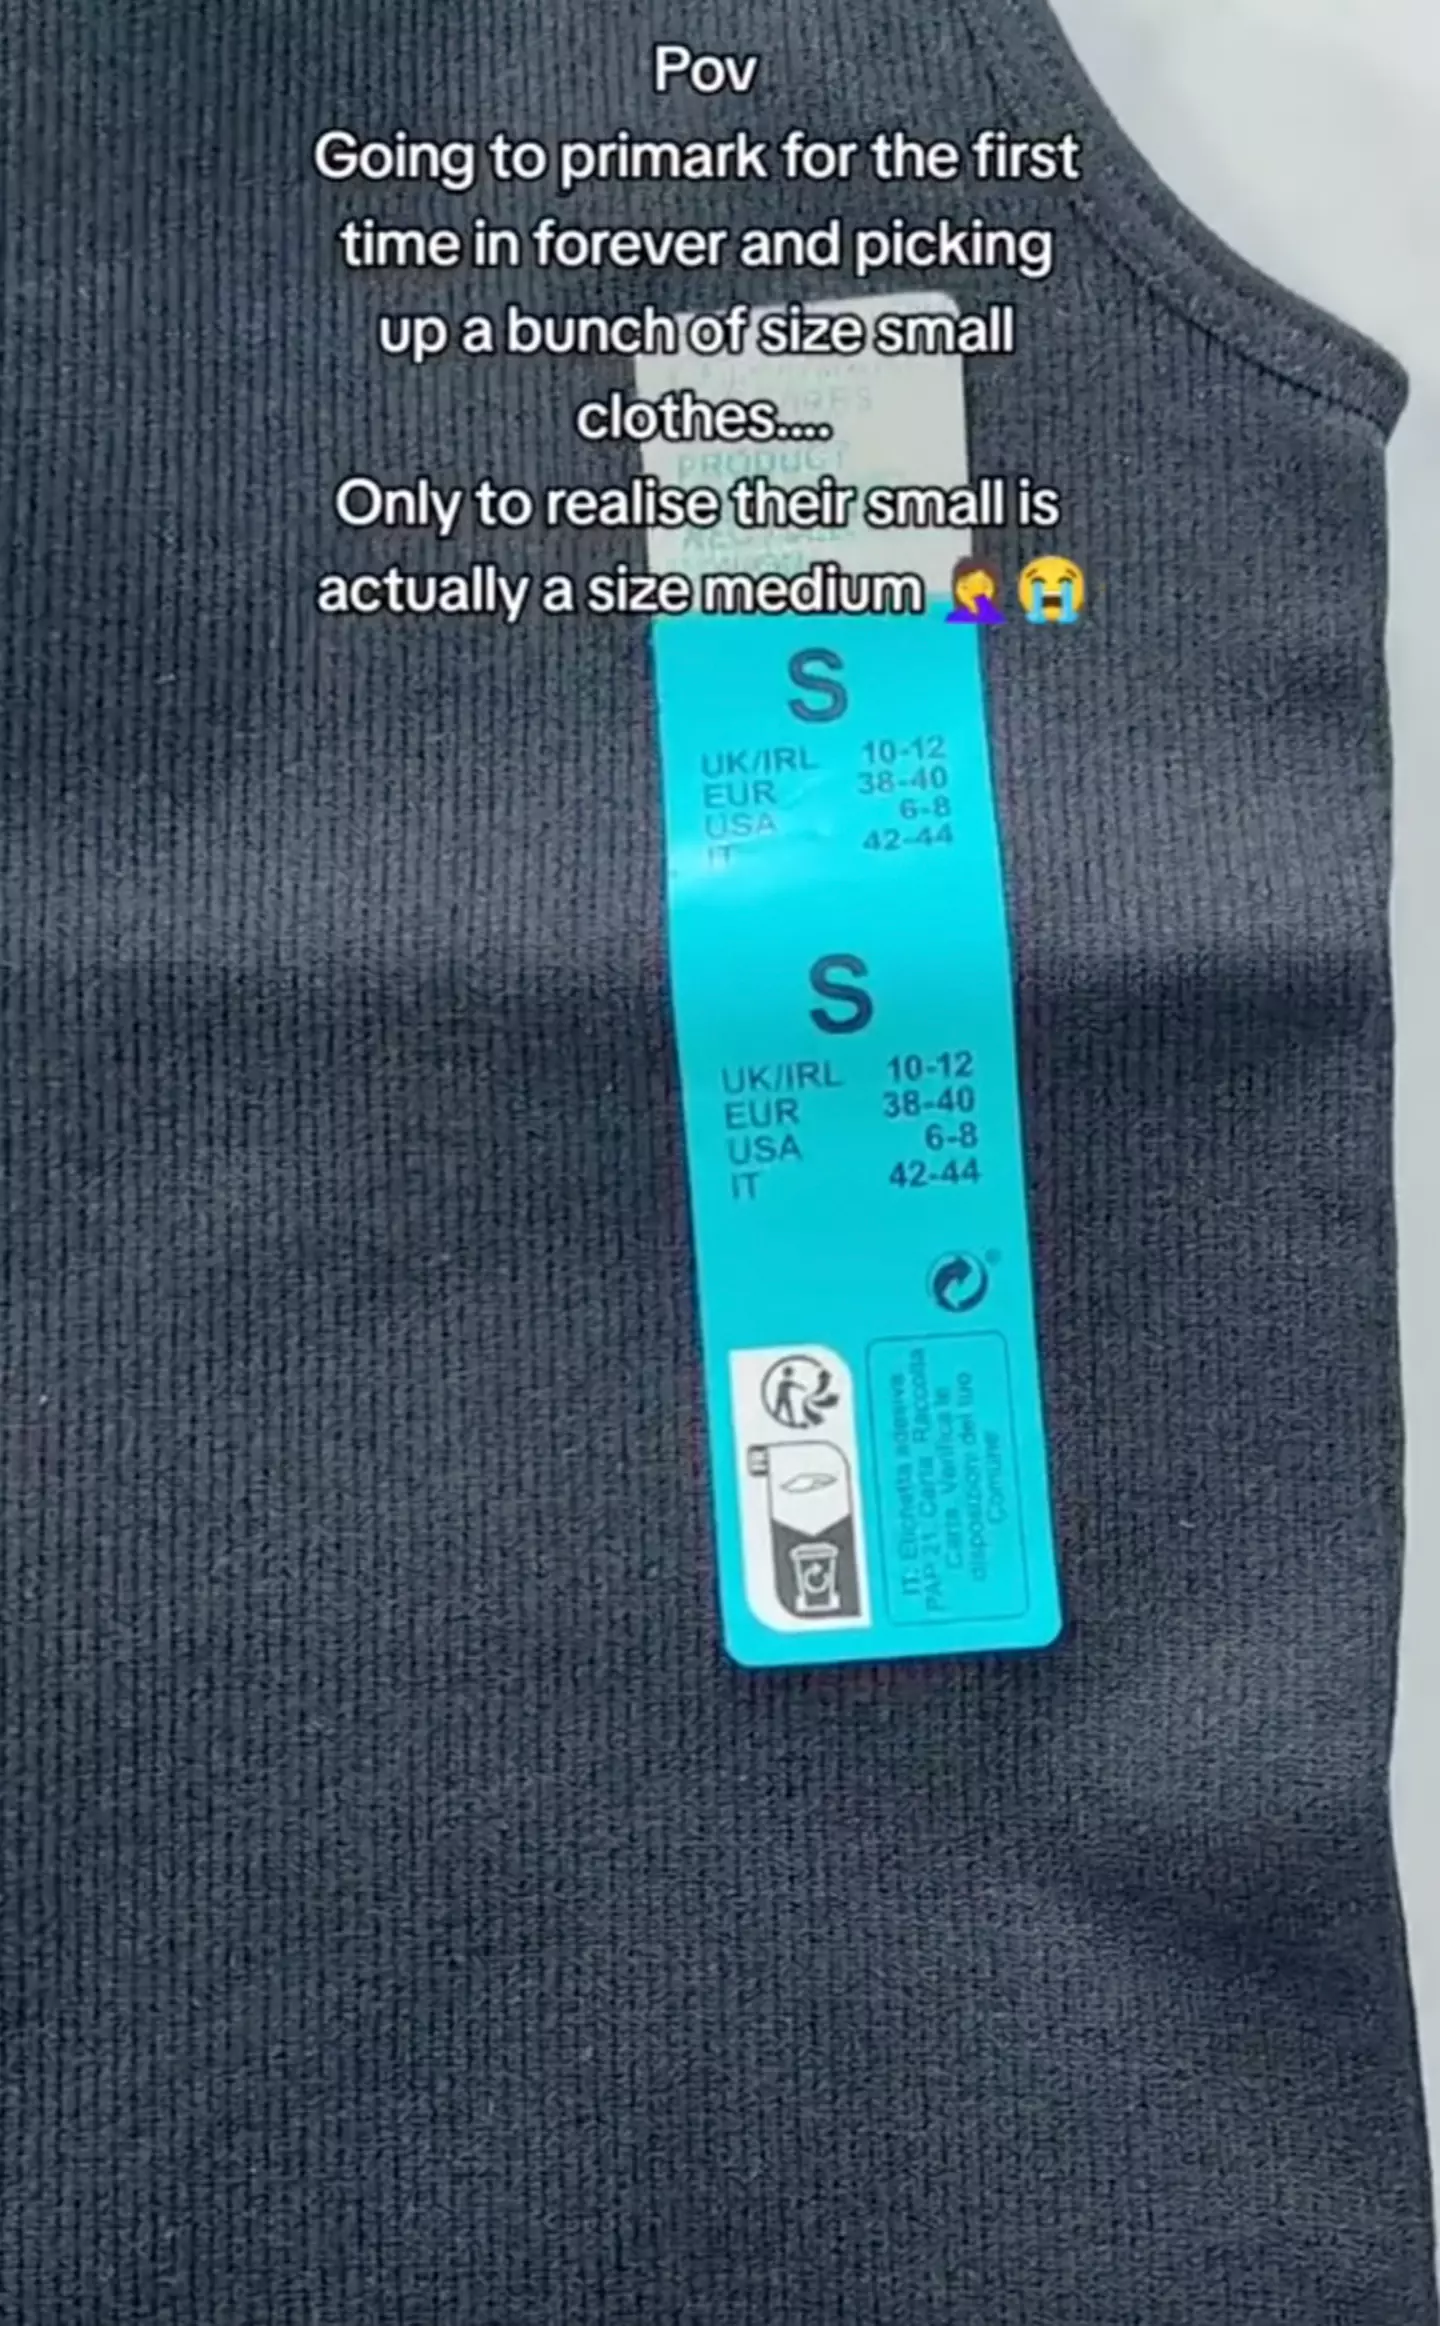 Primark has introduced a new change to its sizing.